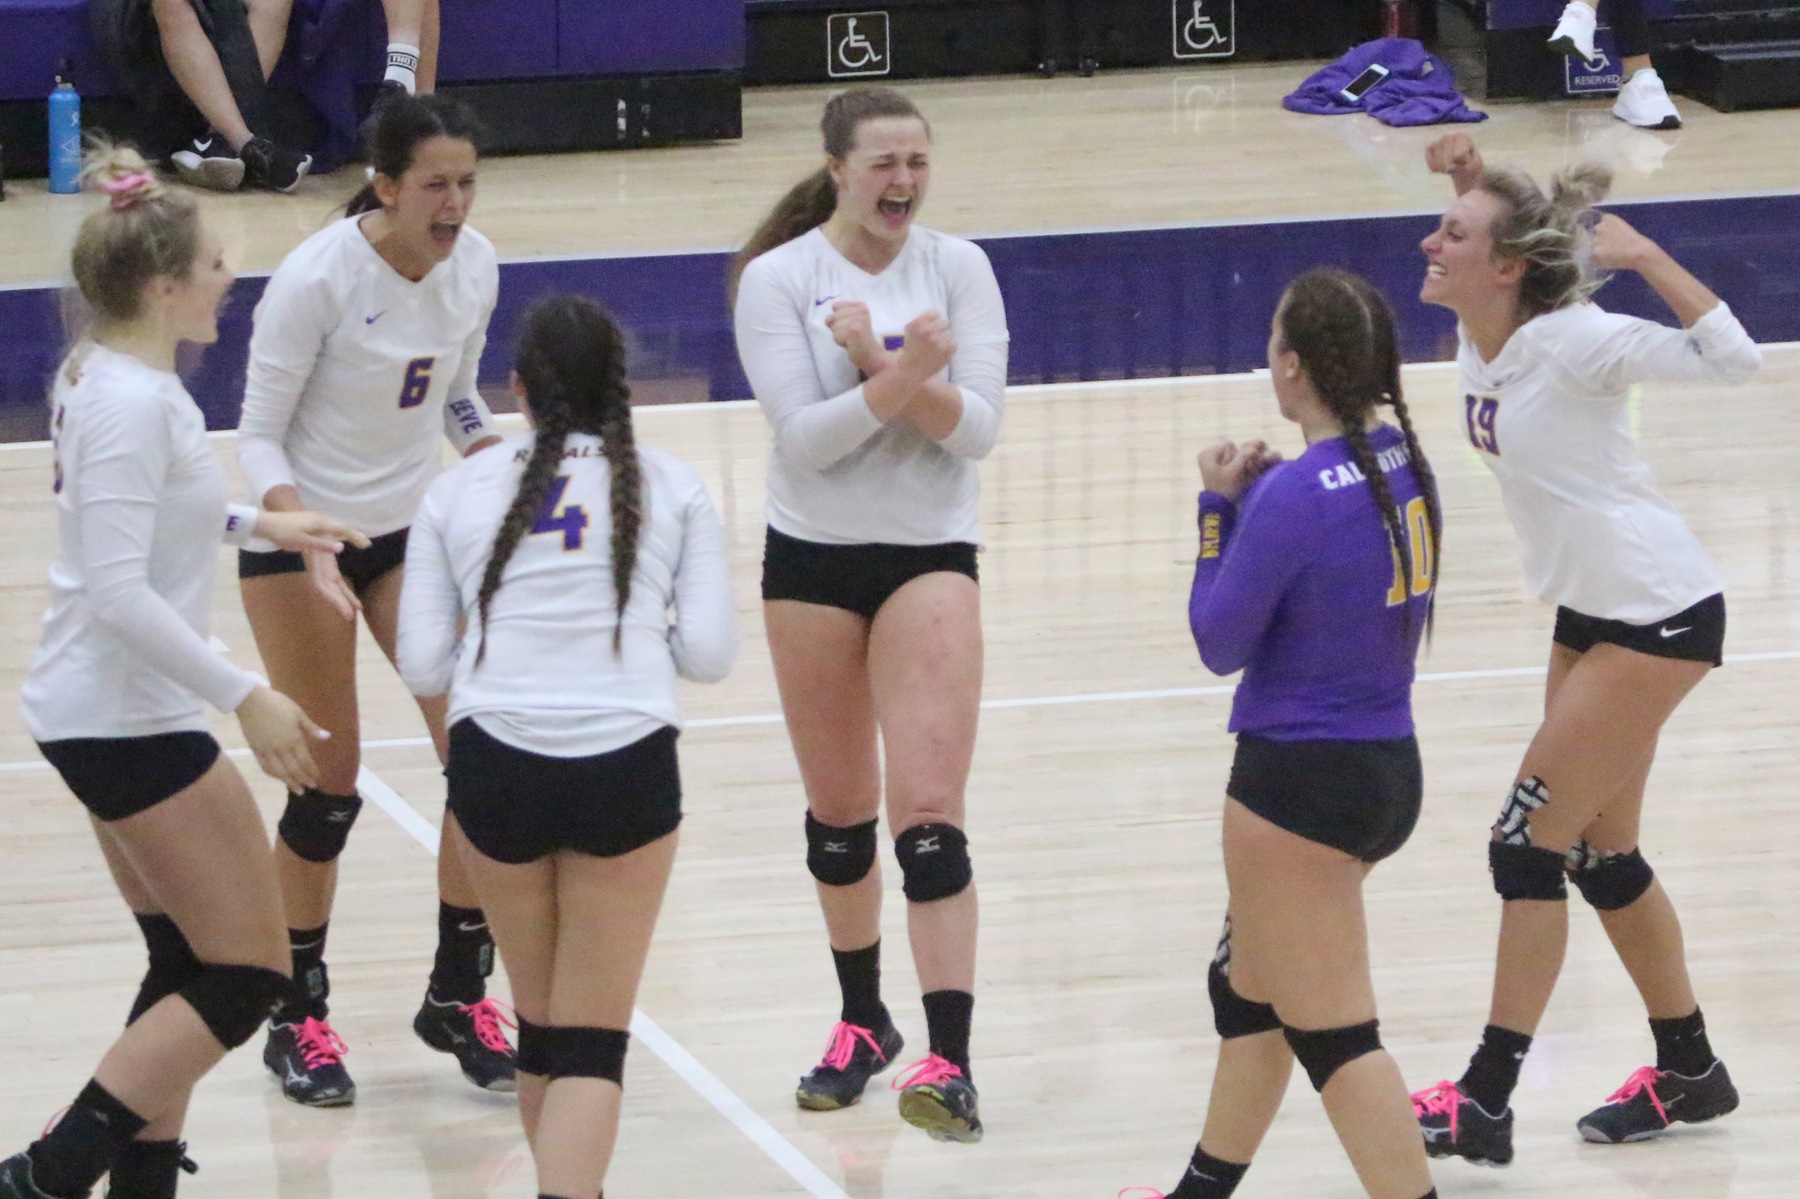 Regals defeat Panthers and advance to SCIAC Tournament Championship match.